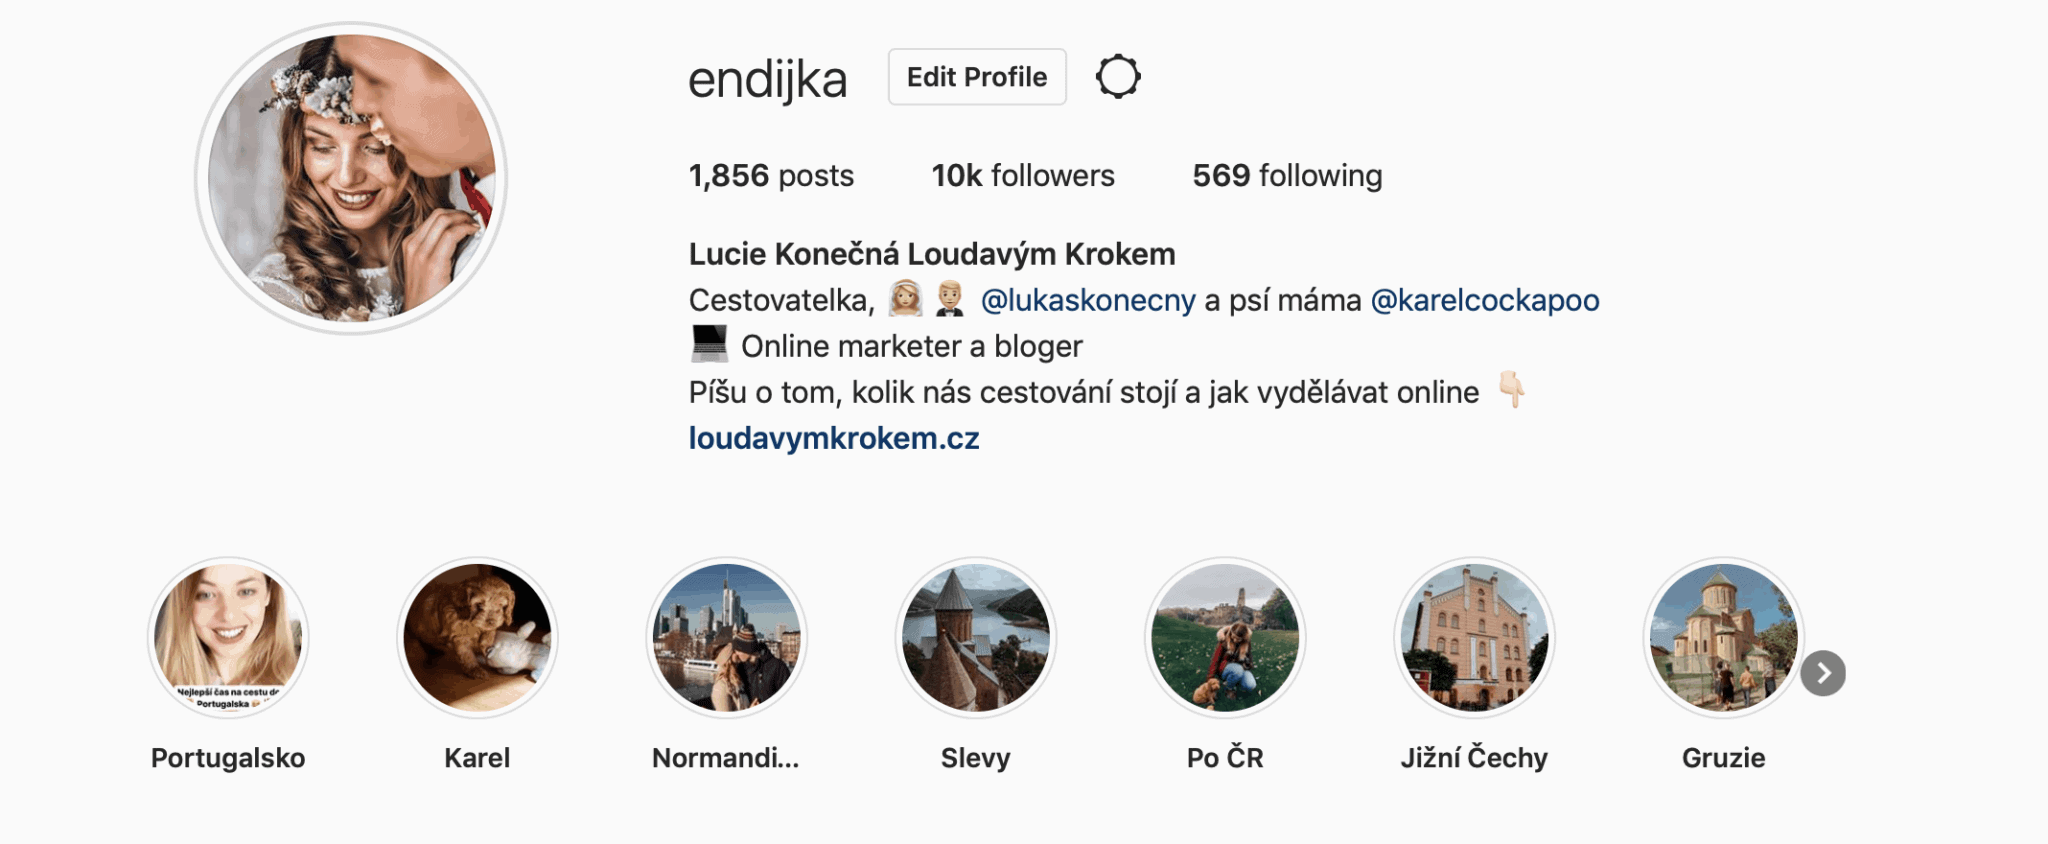 My Instagram profile 🙂 You can follow me here